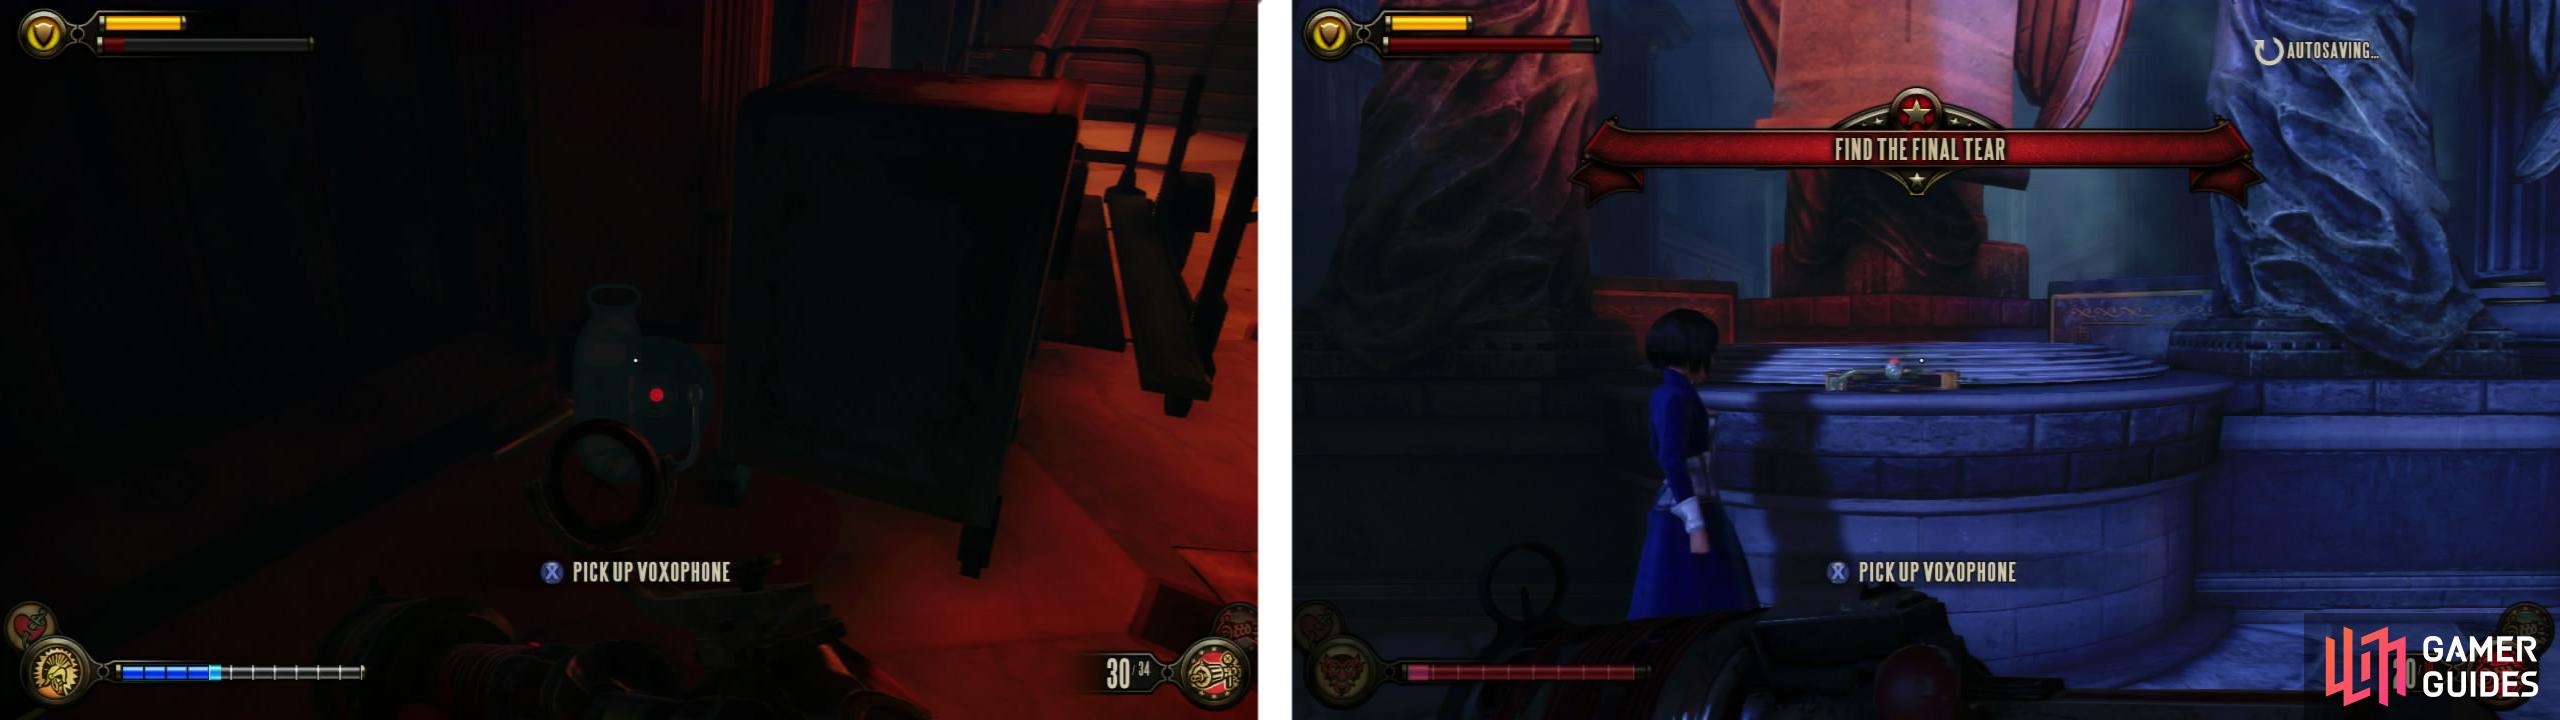 On the left side of the vault is a Voxophone (left). Once you have dealt with the tear in the vault another Voxophone will appear (right).